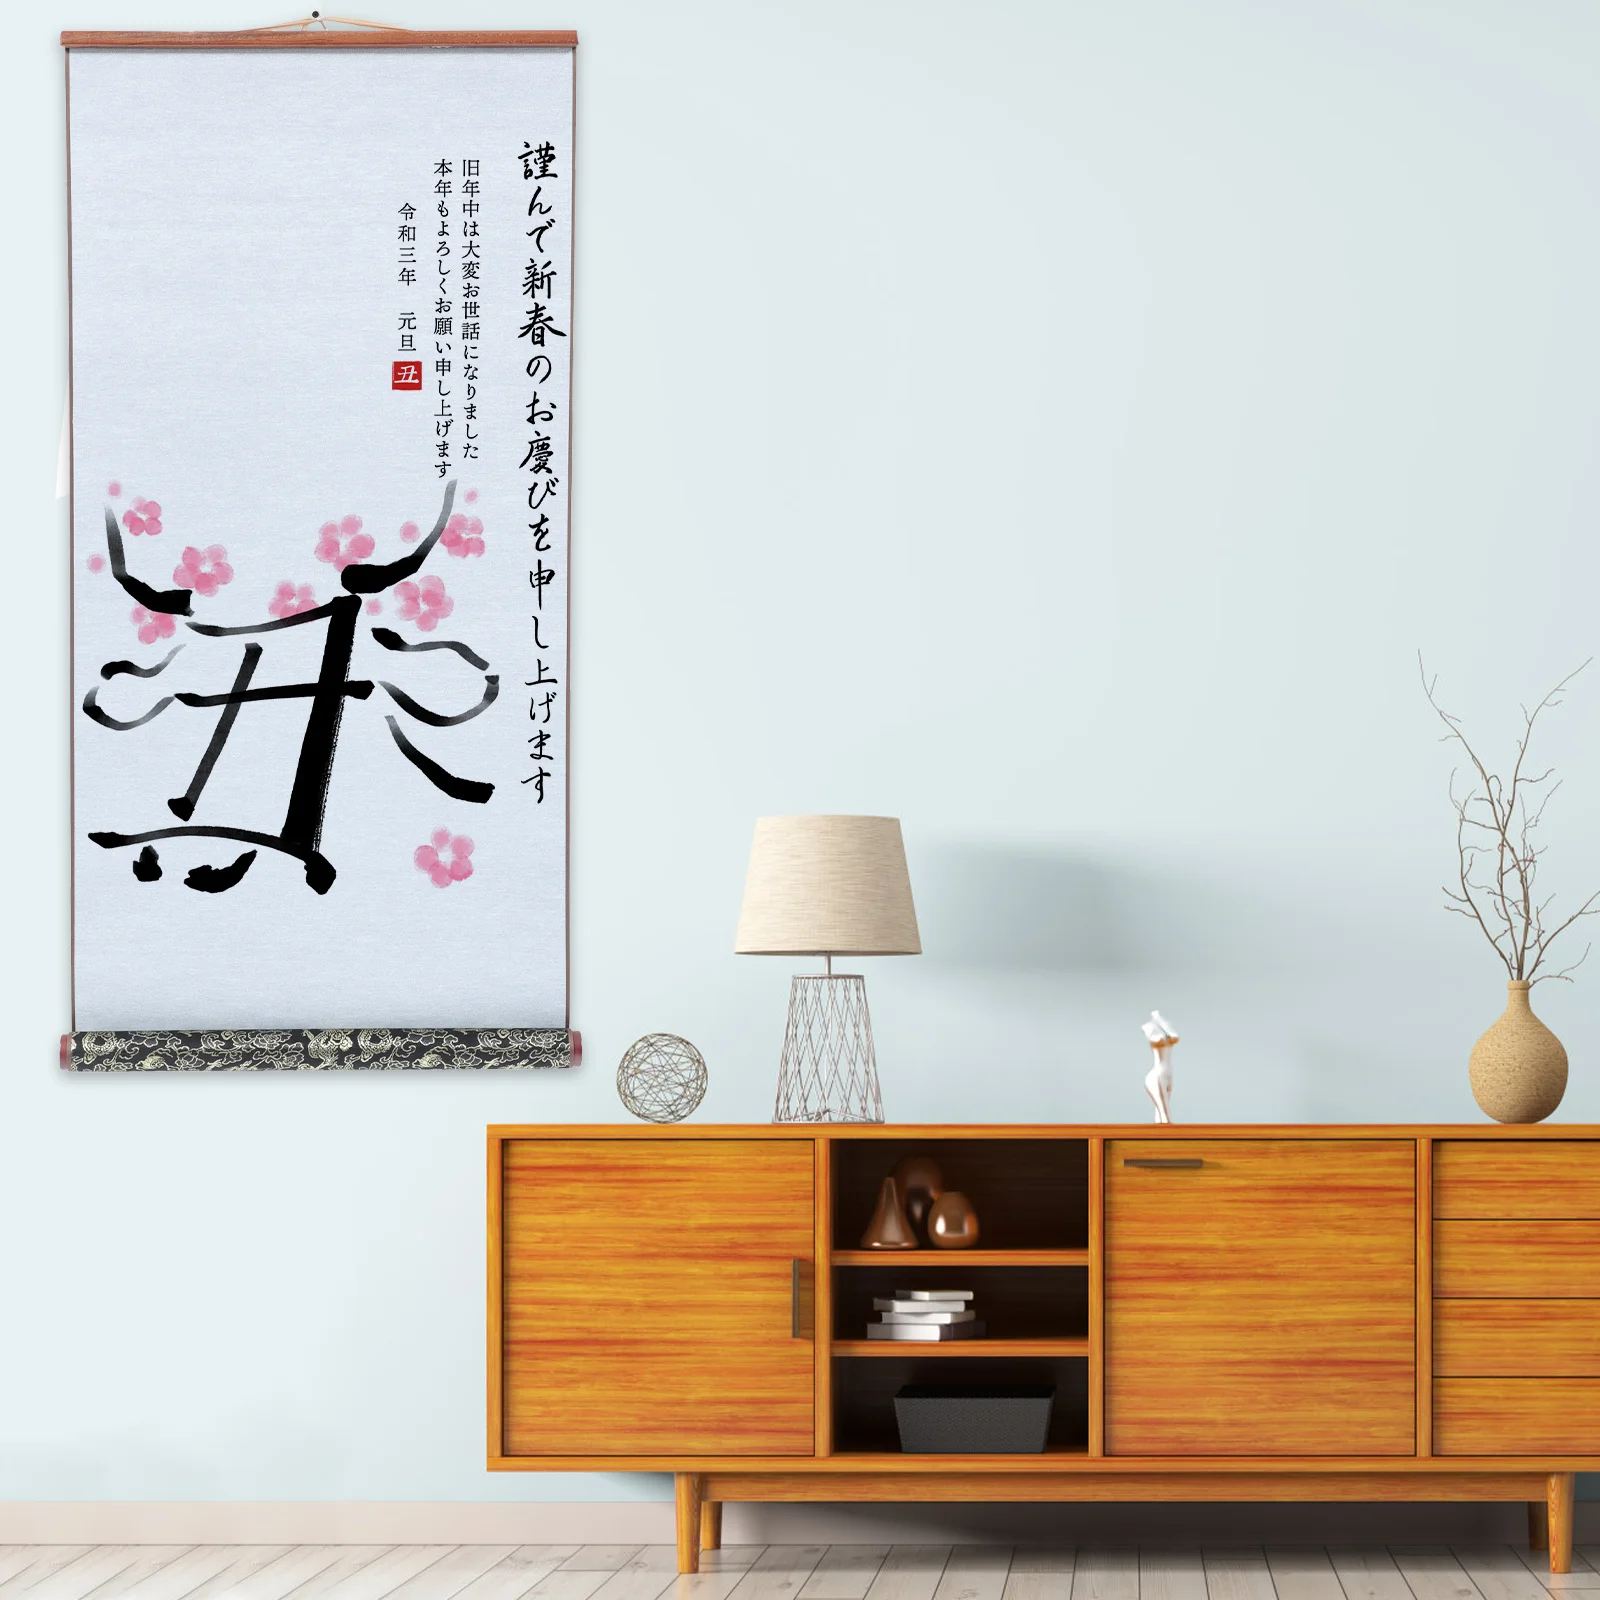 Chinese Wall Scroll Reusable Chinese Calligraphy Brush Ink Wall-mounted Calligraphy Water Writing Cloth